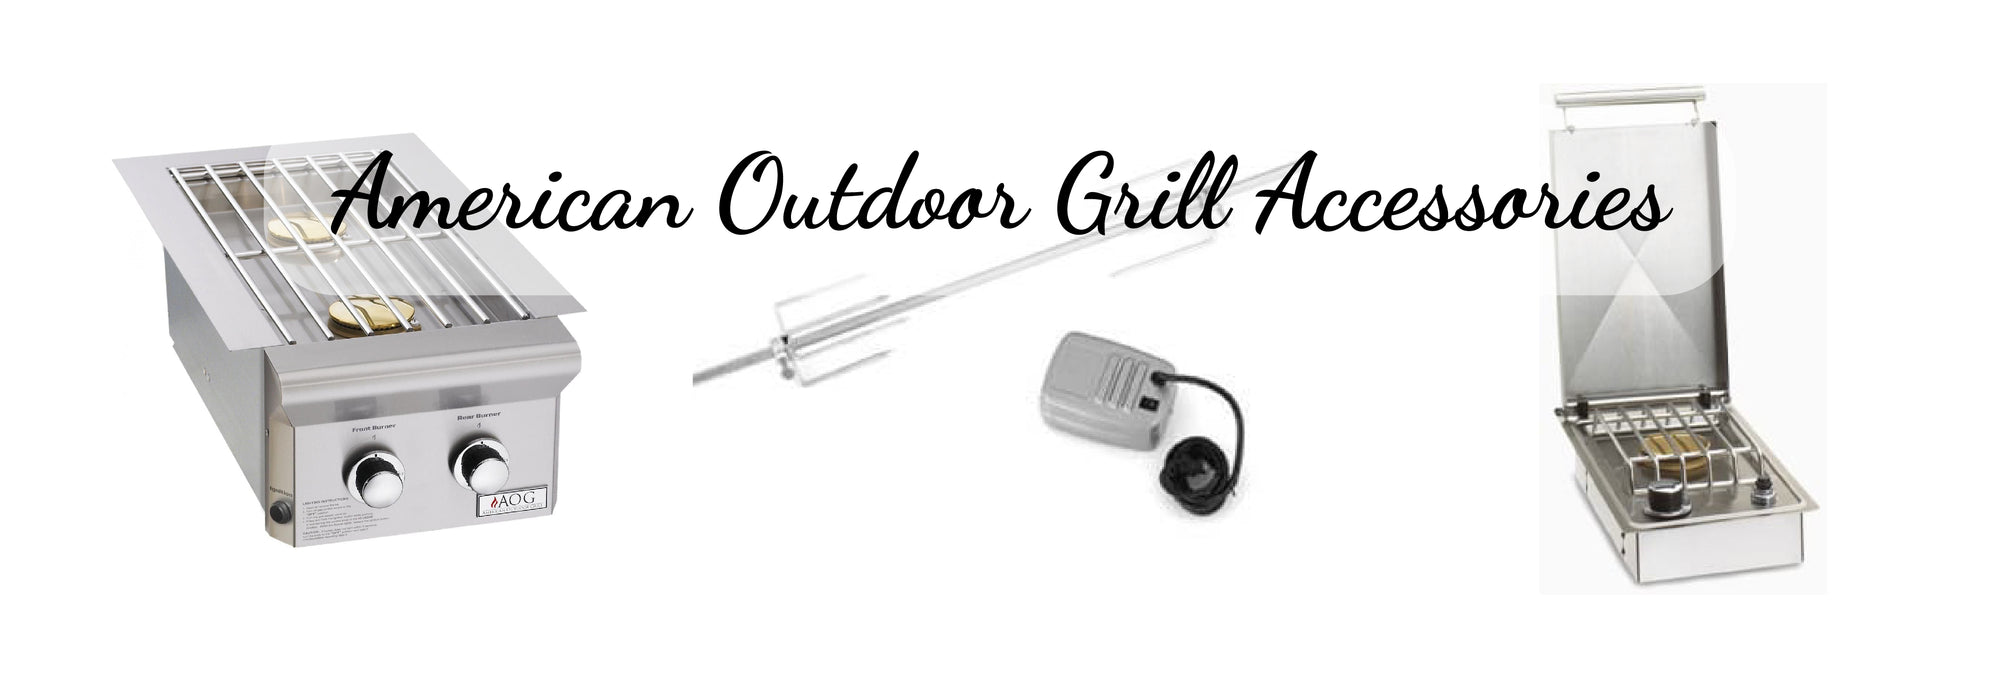 American Outdoor Grill Accessories